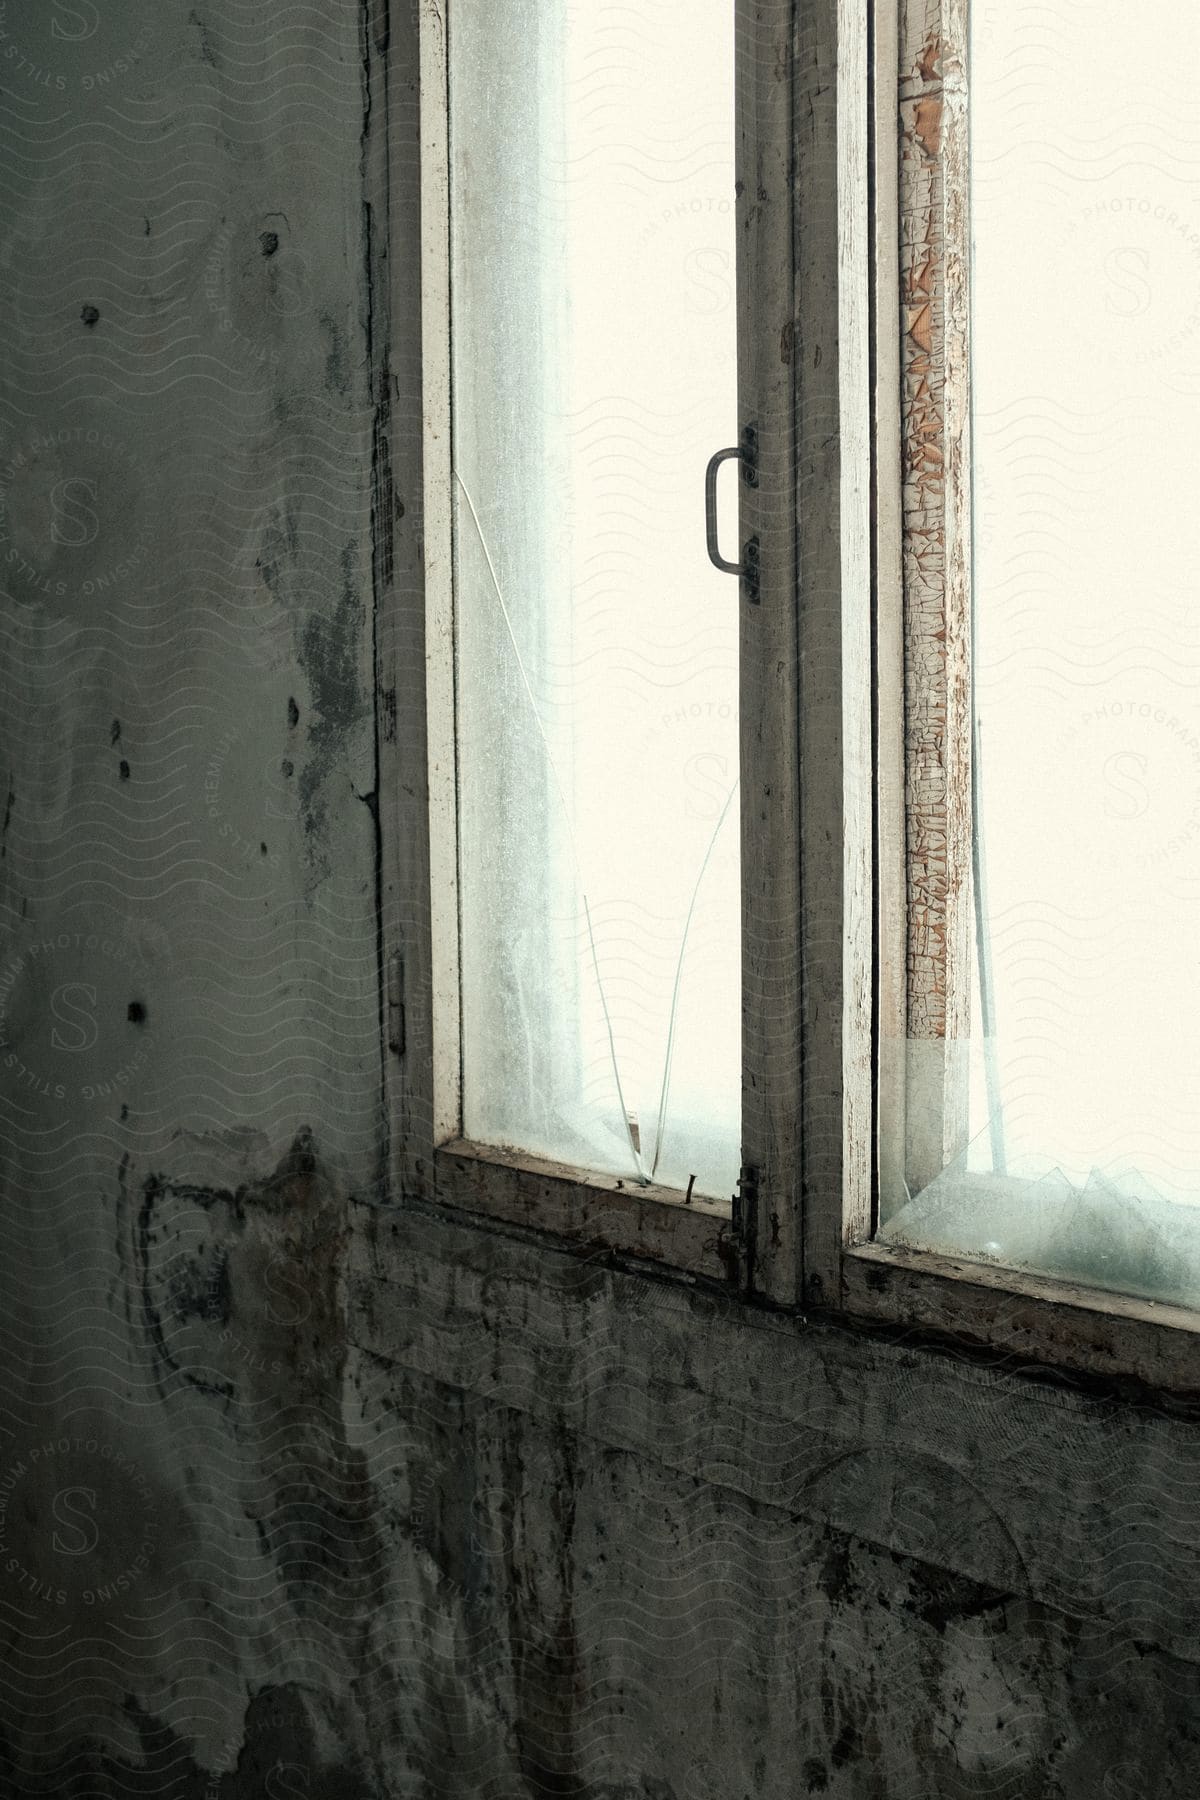 A cracked glass window with daylight pouring through in an abandoned building